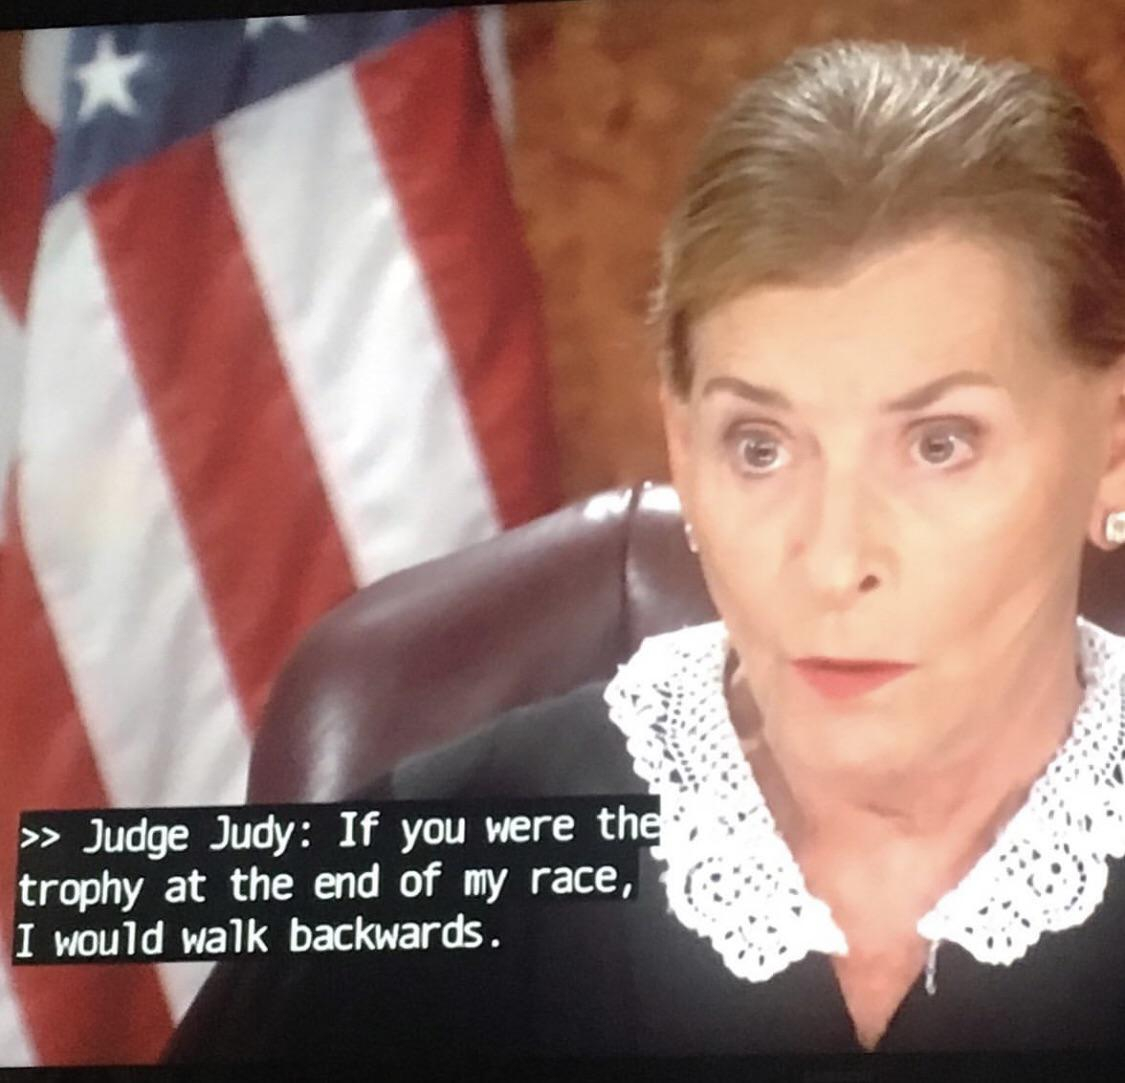 Judge Judy - >> Judge Judy If you were the trophy at the end of my race, I would walk backwards.